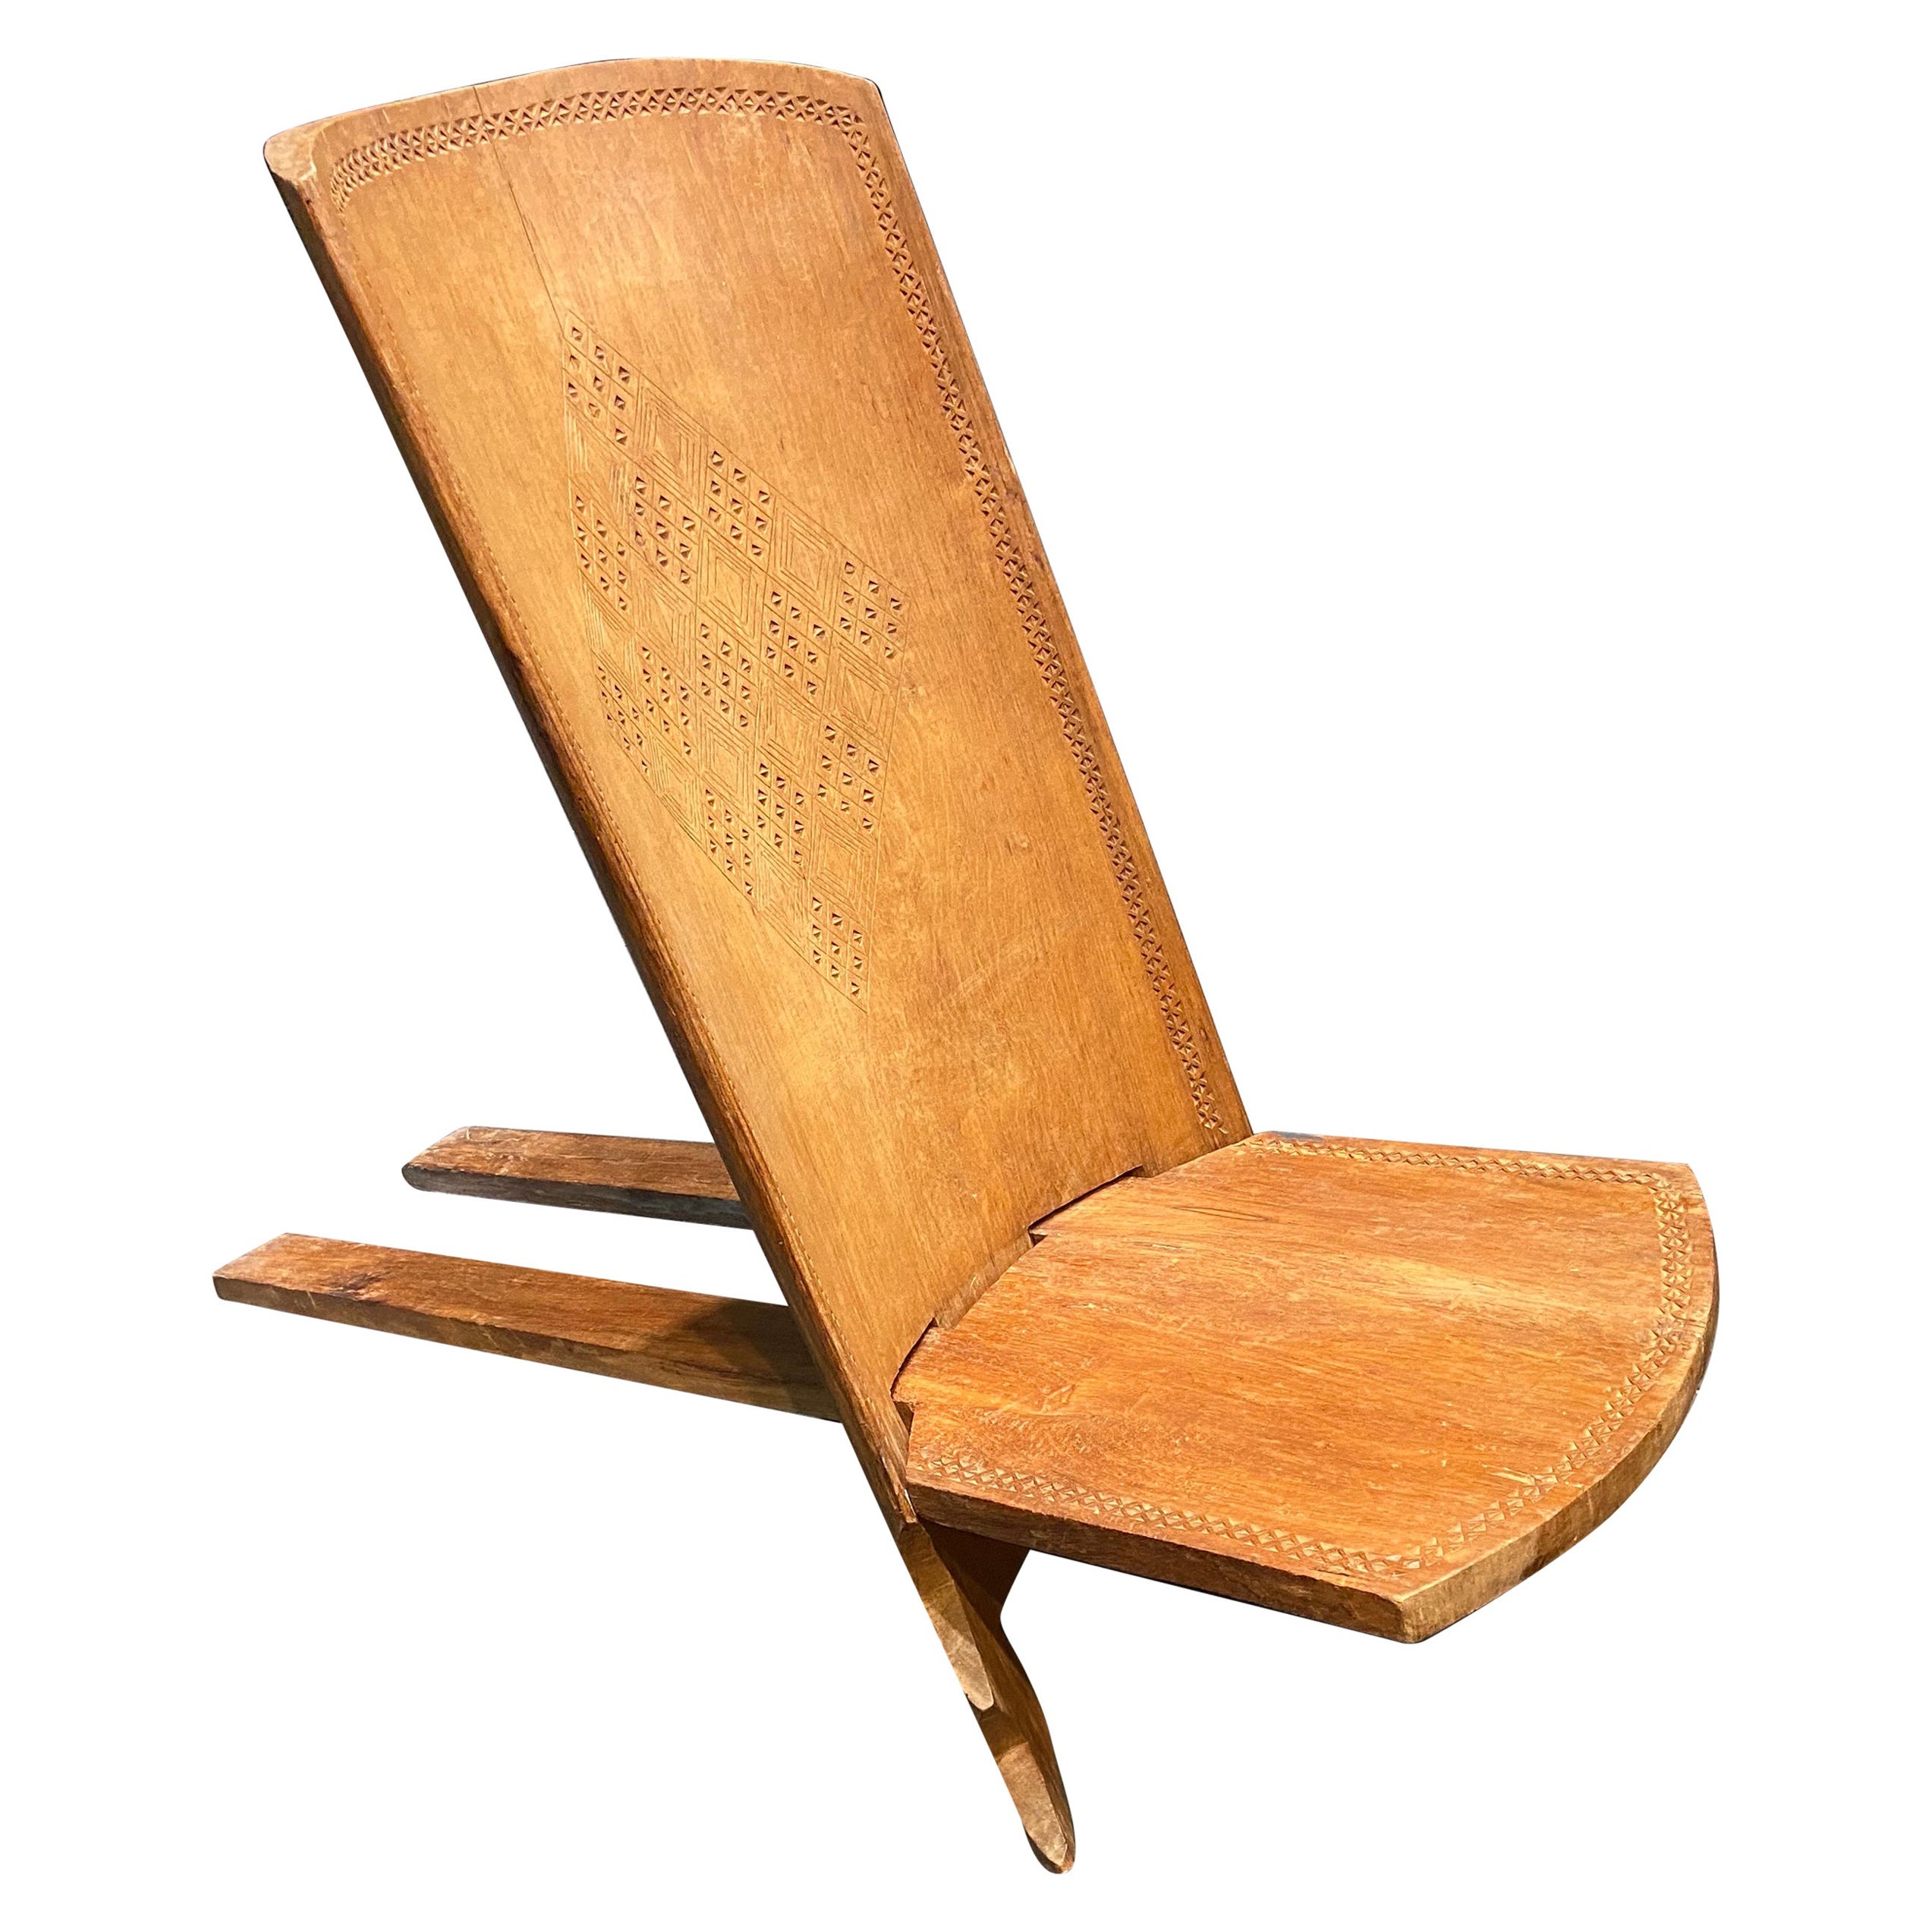 20 Century Hand Carved Folding Palaver Wooden Chair in African Style, circa 1930